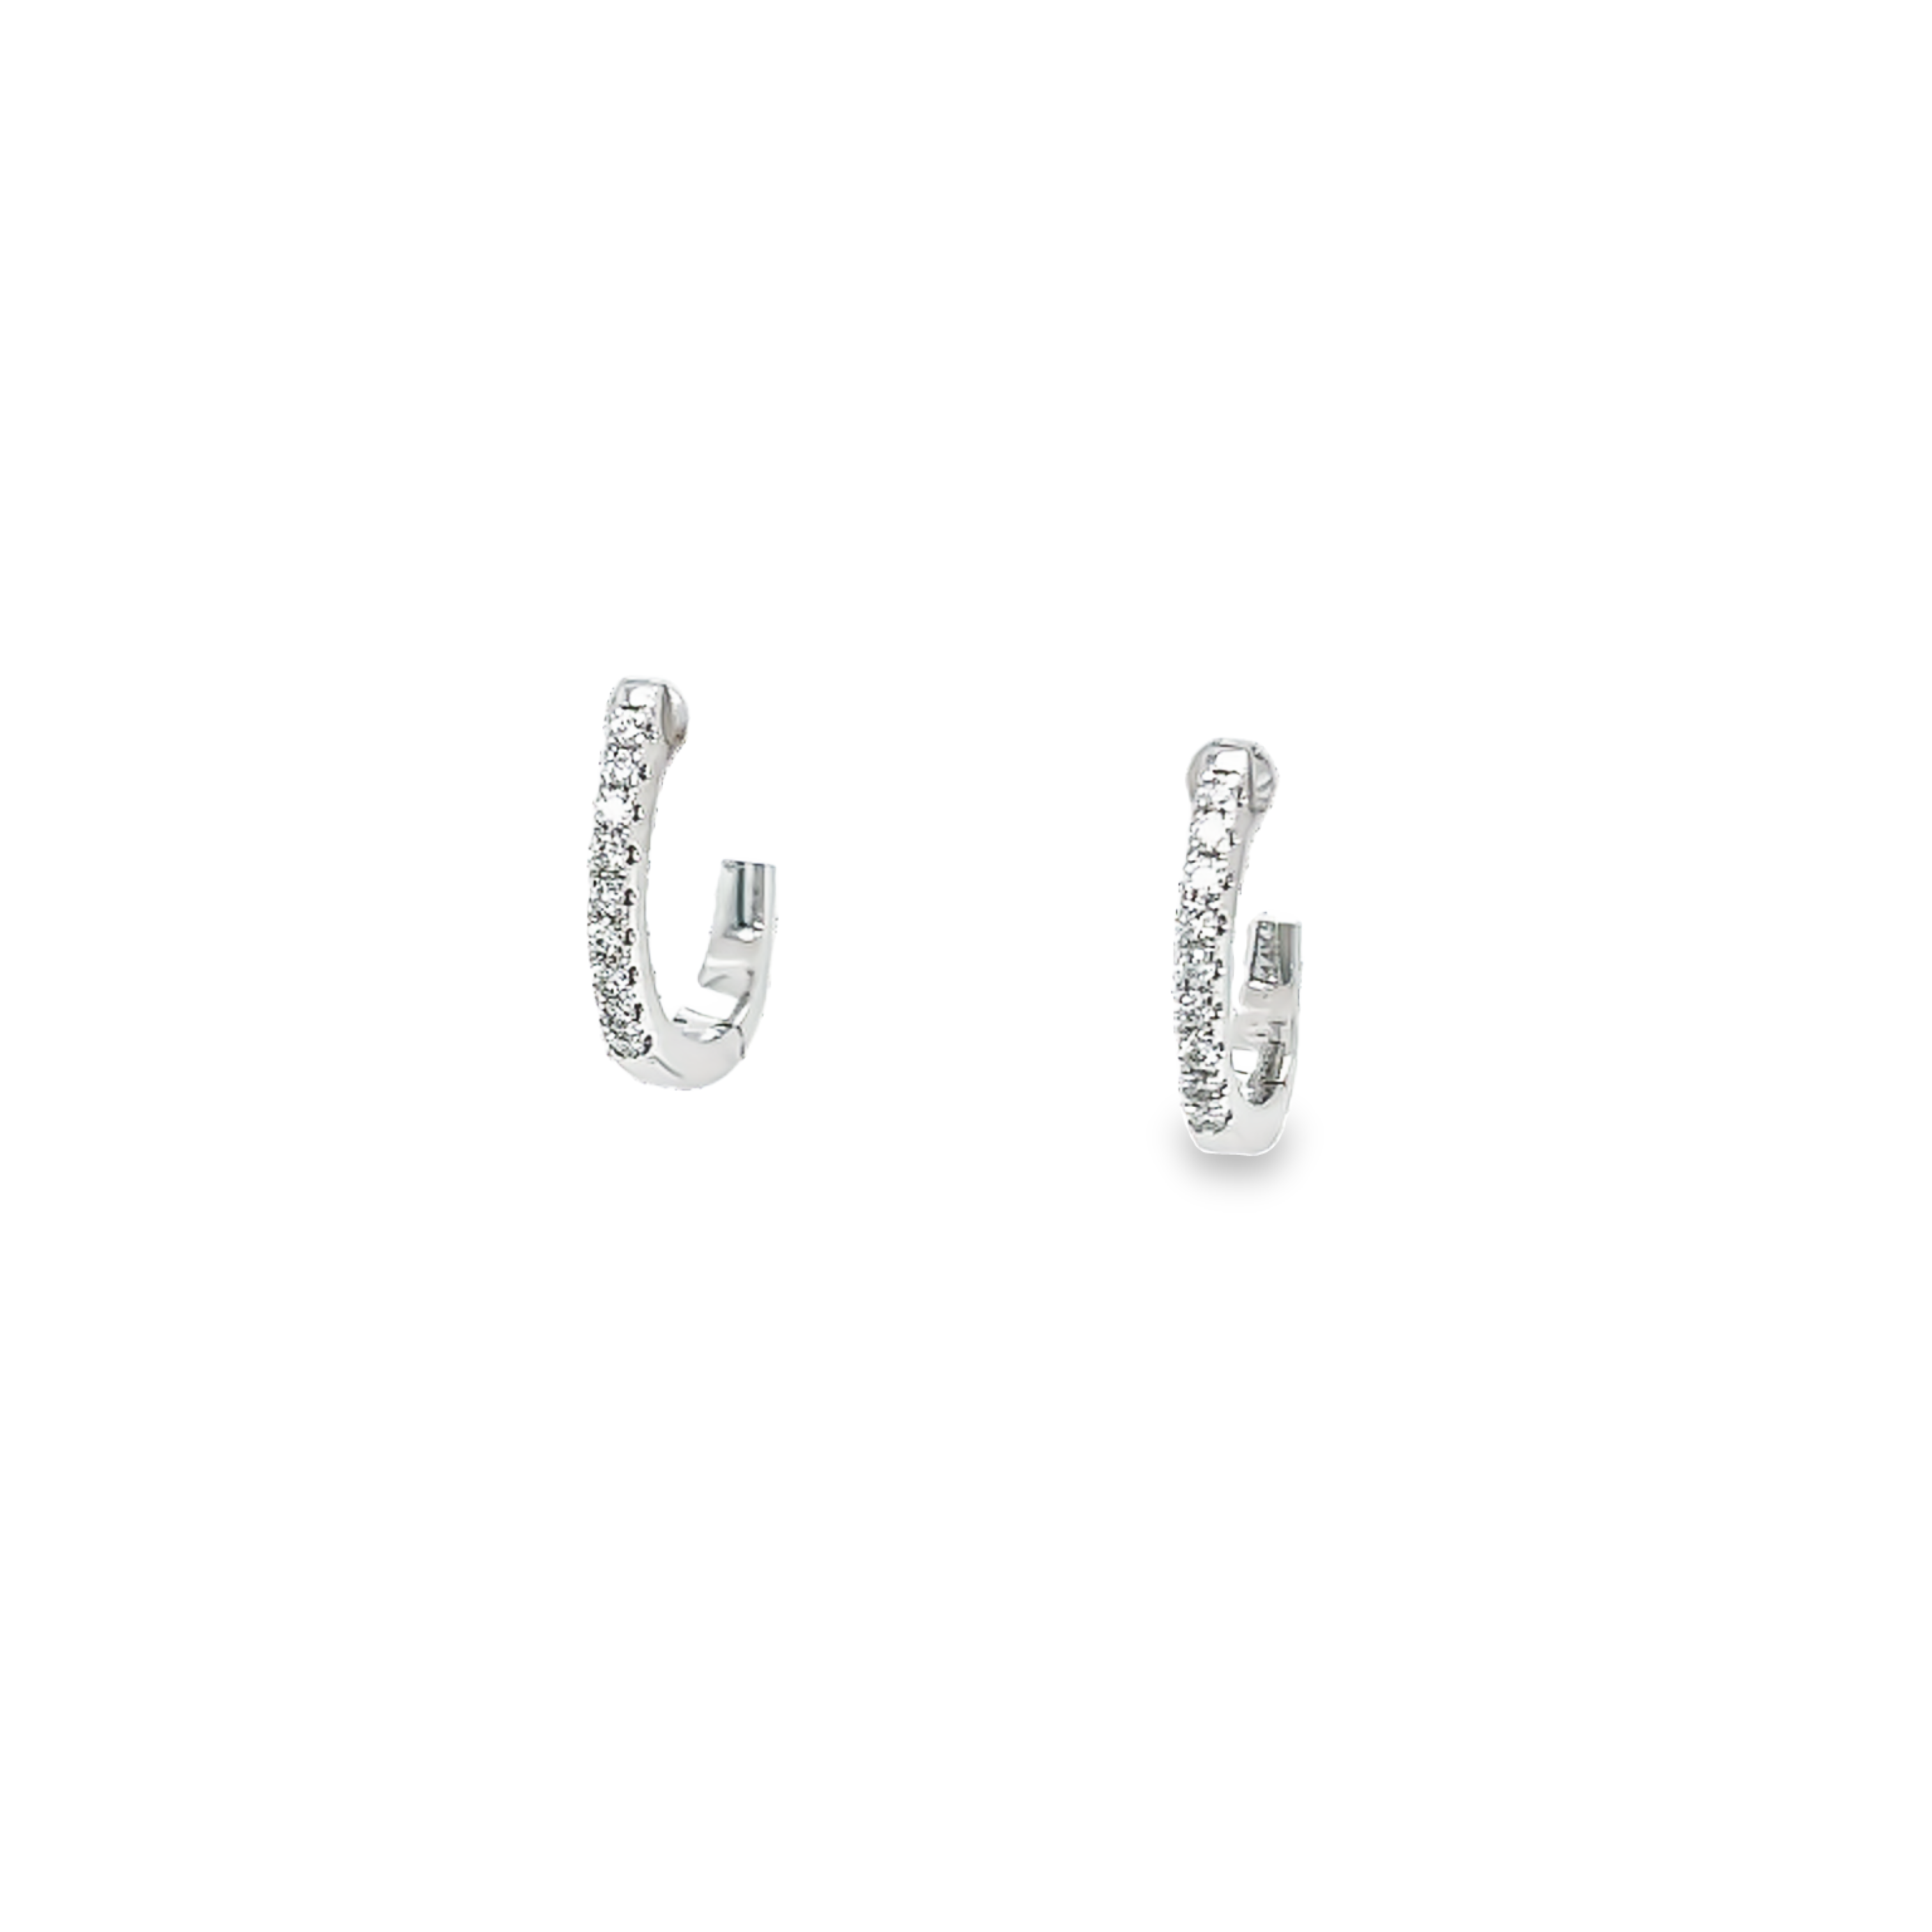 14 karat white gold huggie earrings with 18=.09 total weight round brilliant Diamonds with G color and SI clarity.